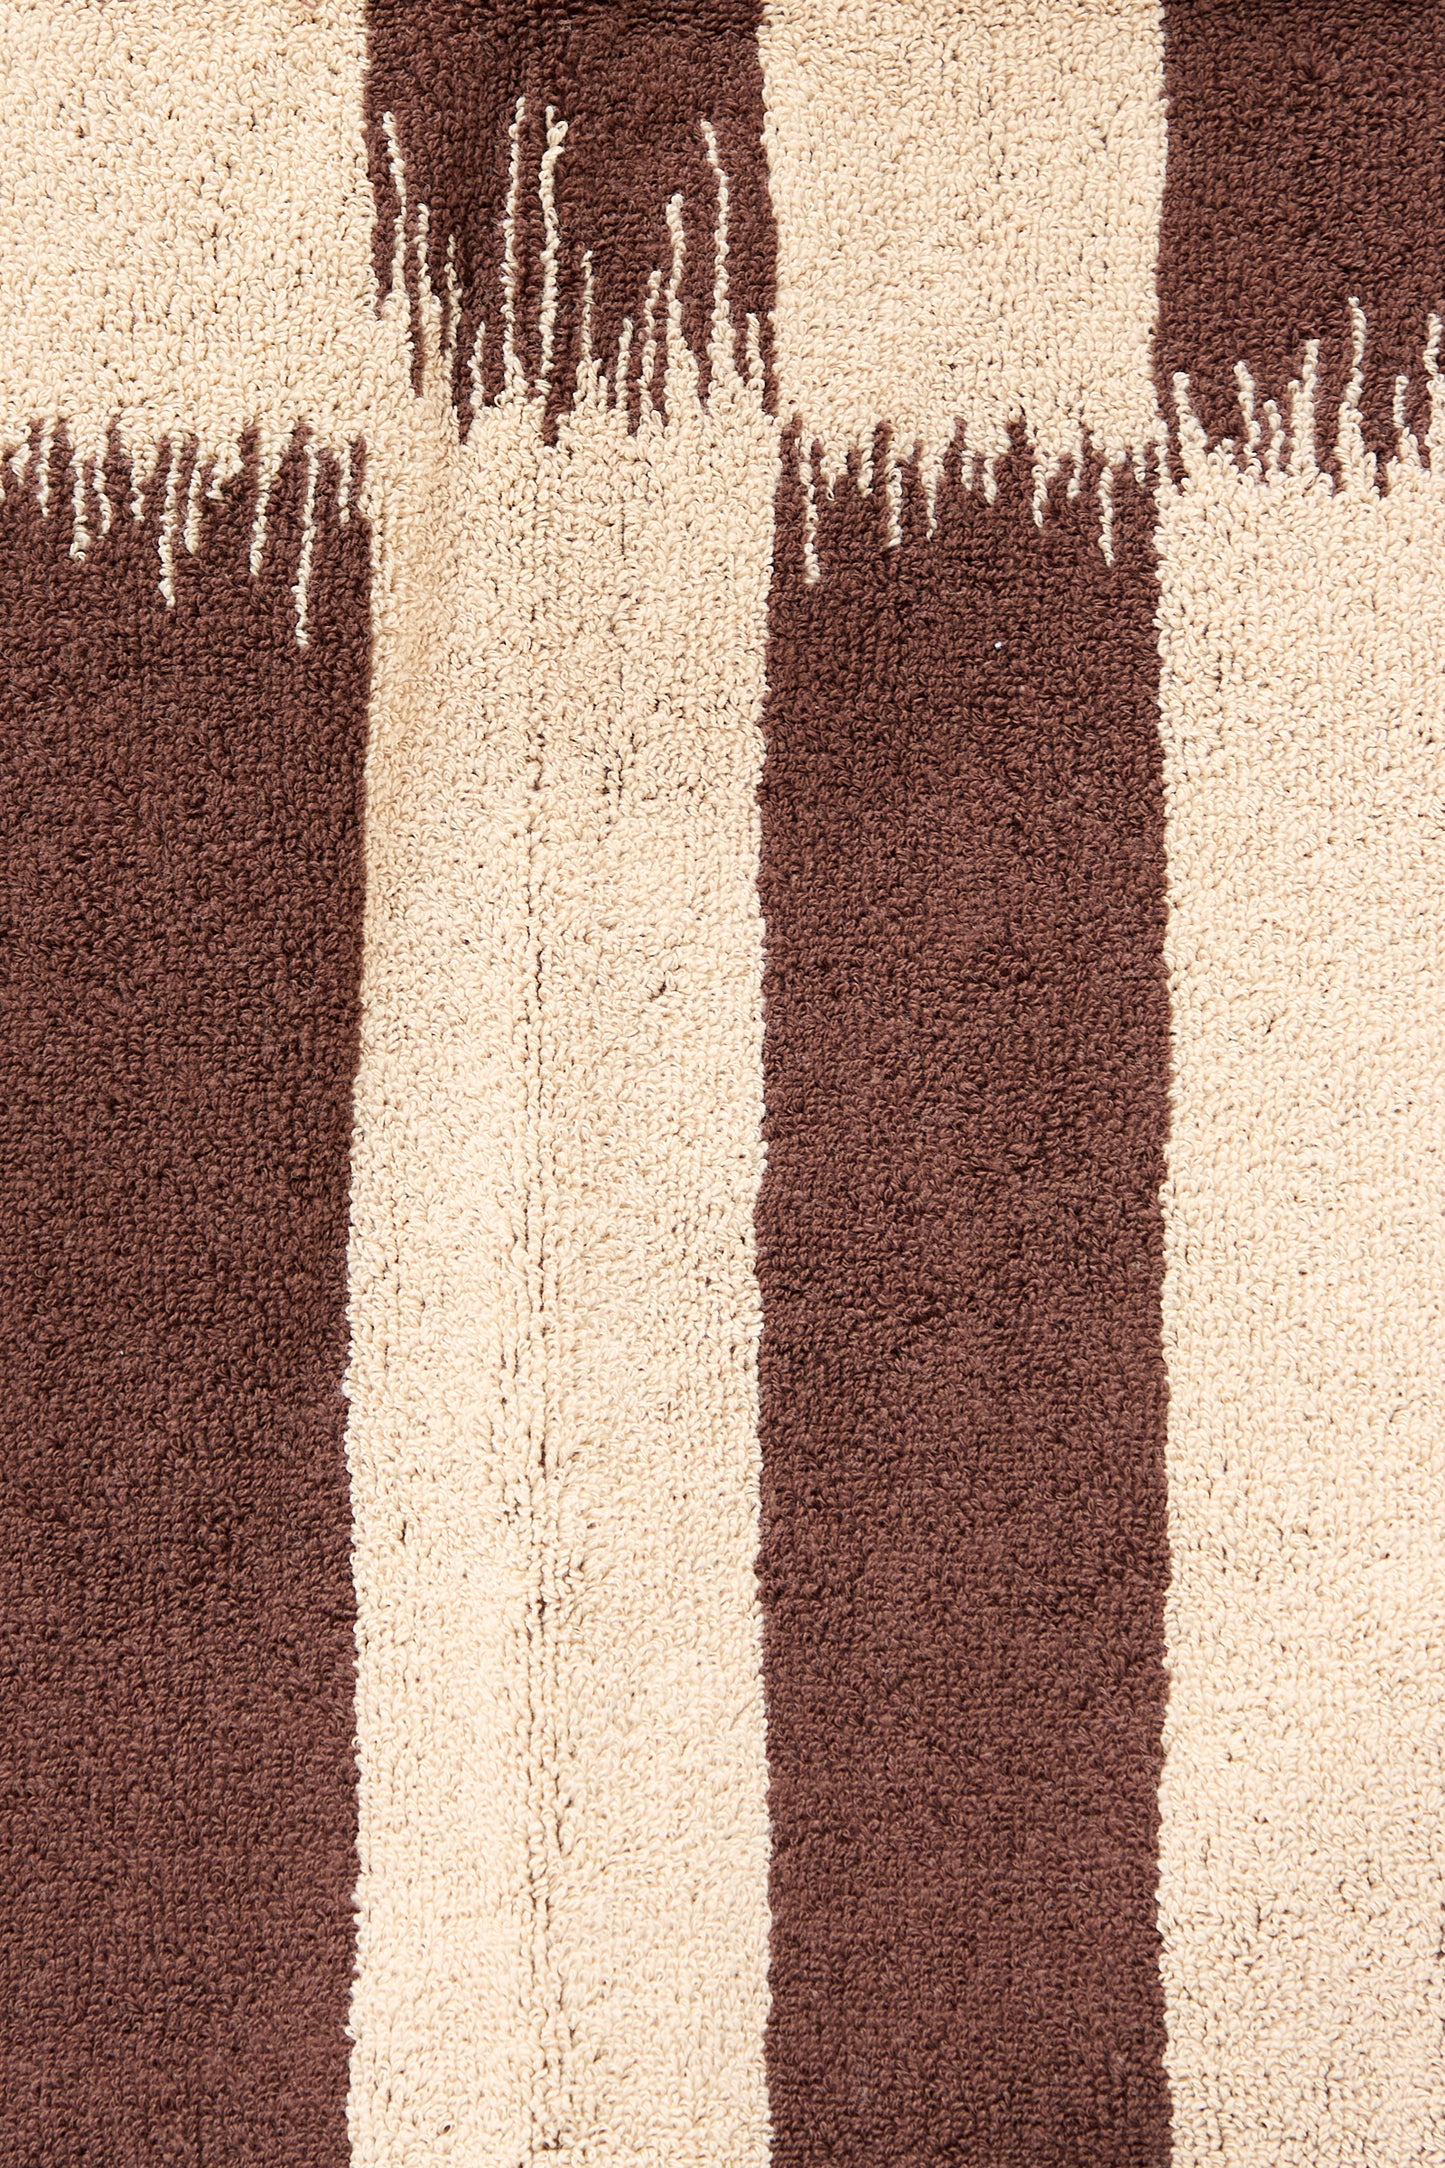 Close-up of an Autumn Sonata Karin Bath Towel featuring an Ikat weaving technique with alternating beige and brown vertical stripes, showing detailed texture and fringe edges.